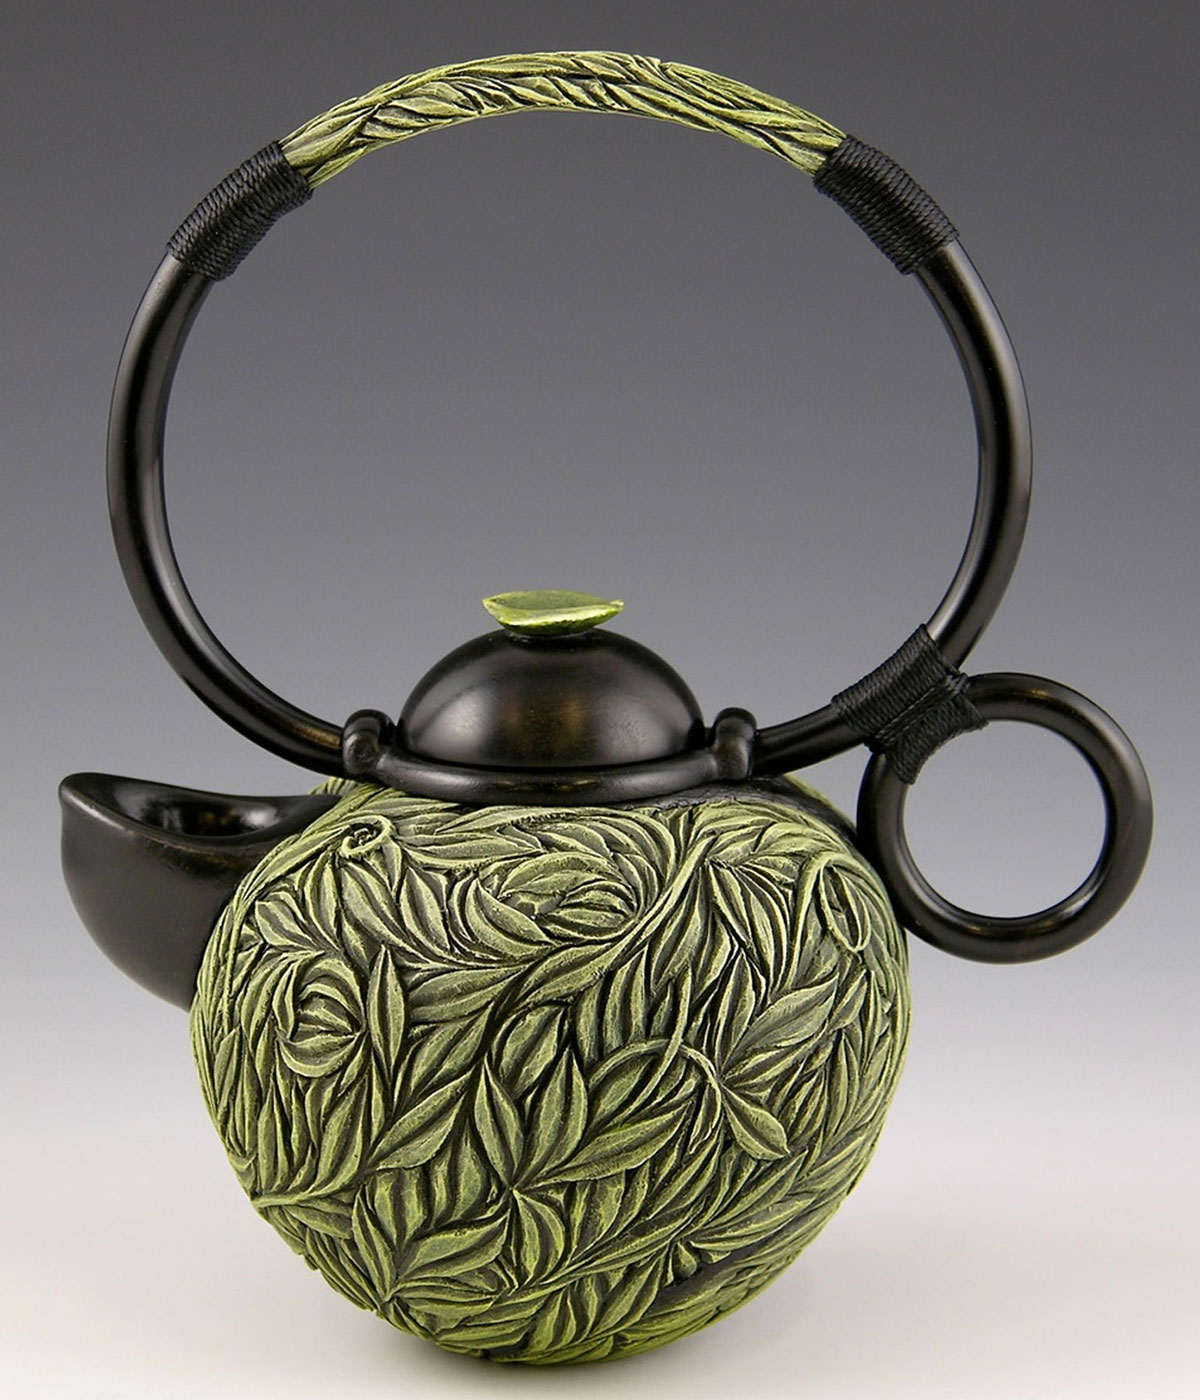 A teapot sculpture with a narrow, round handle attached to the cap; the body of the pot is etched with layers of green leaves